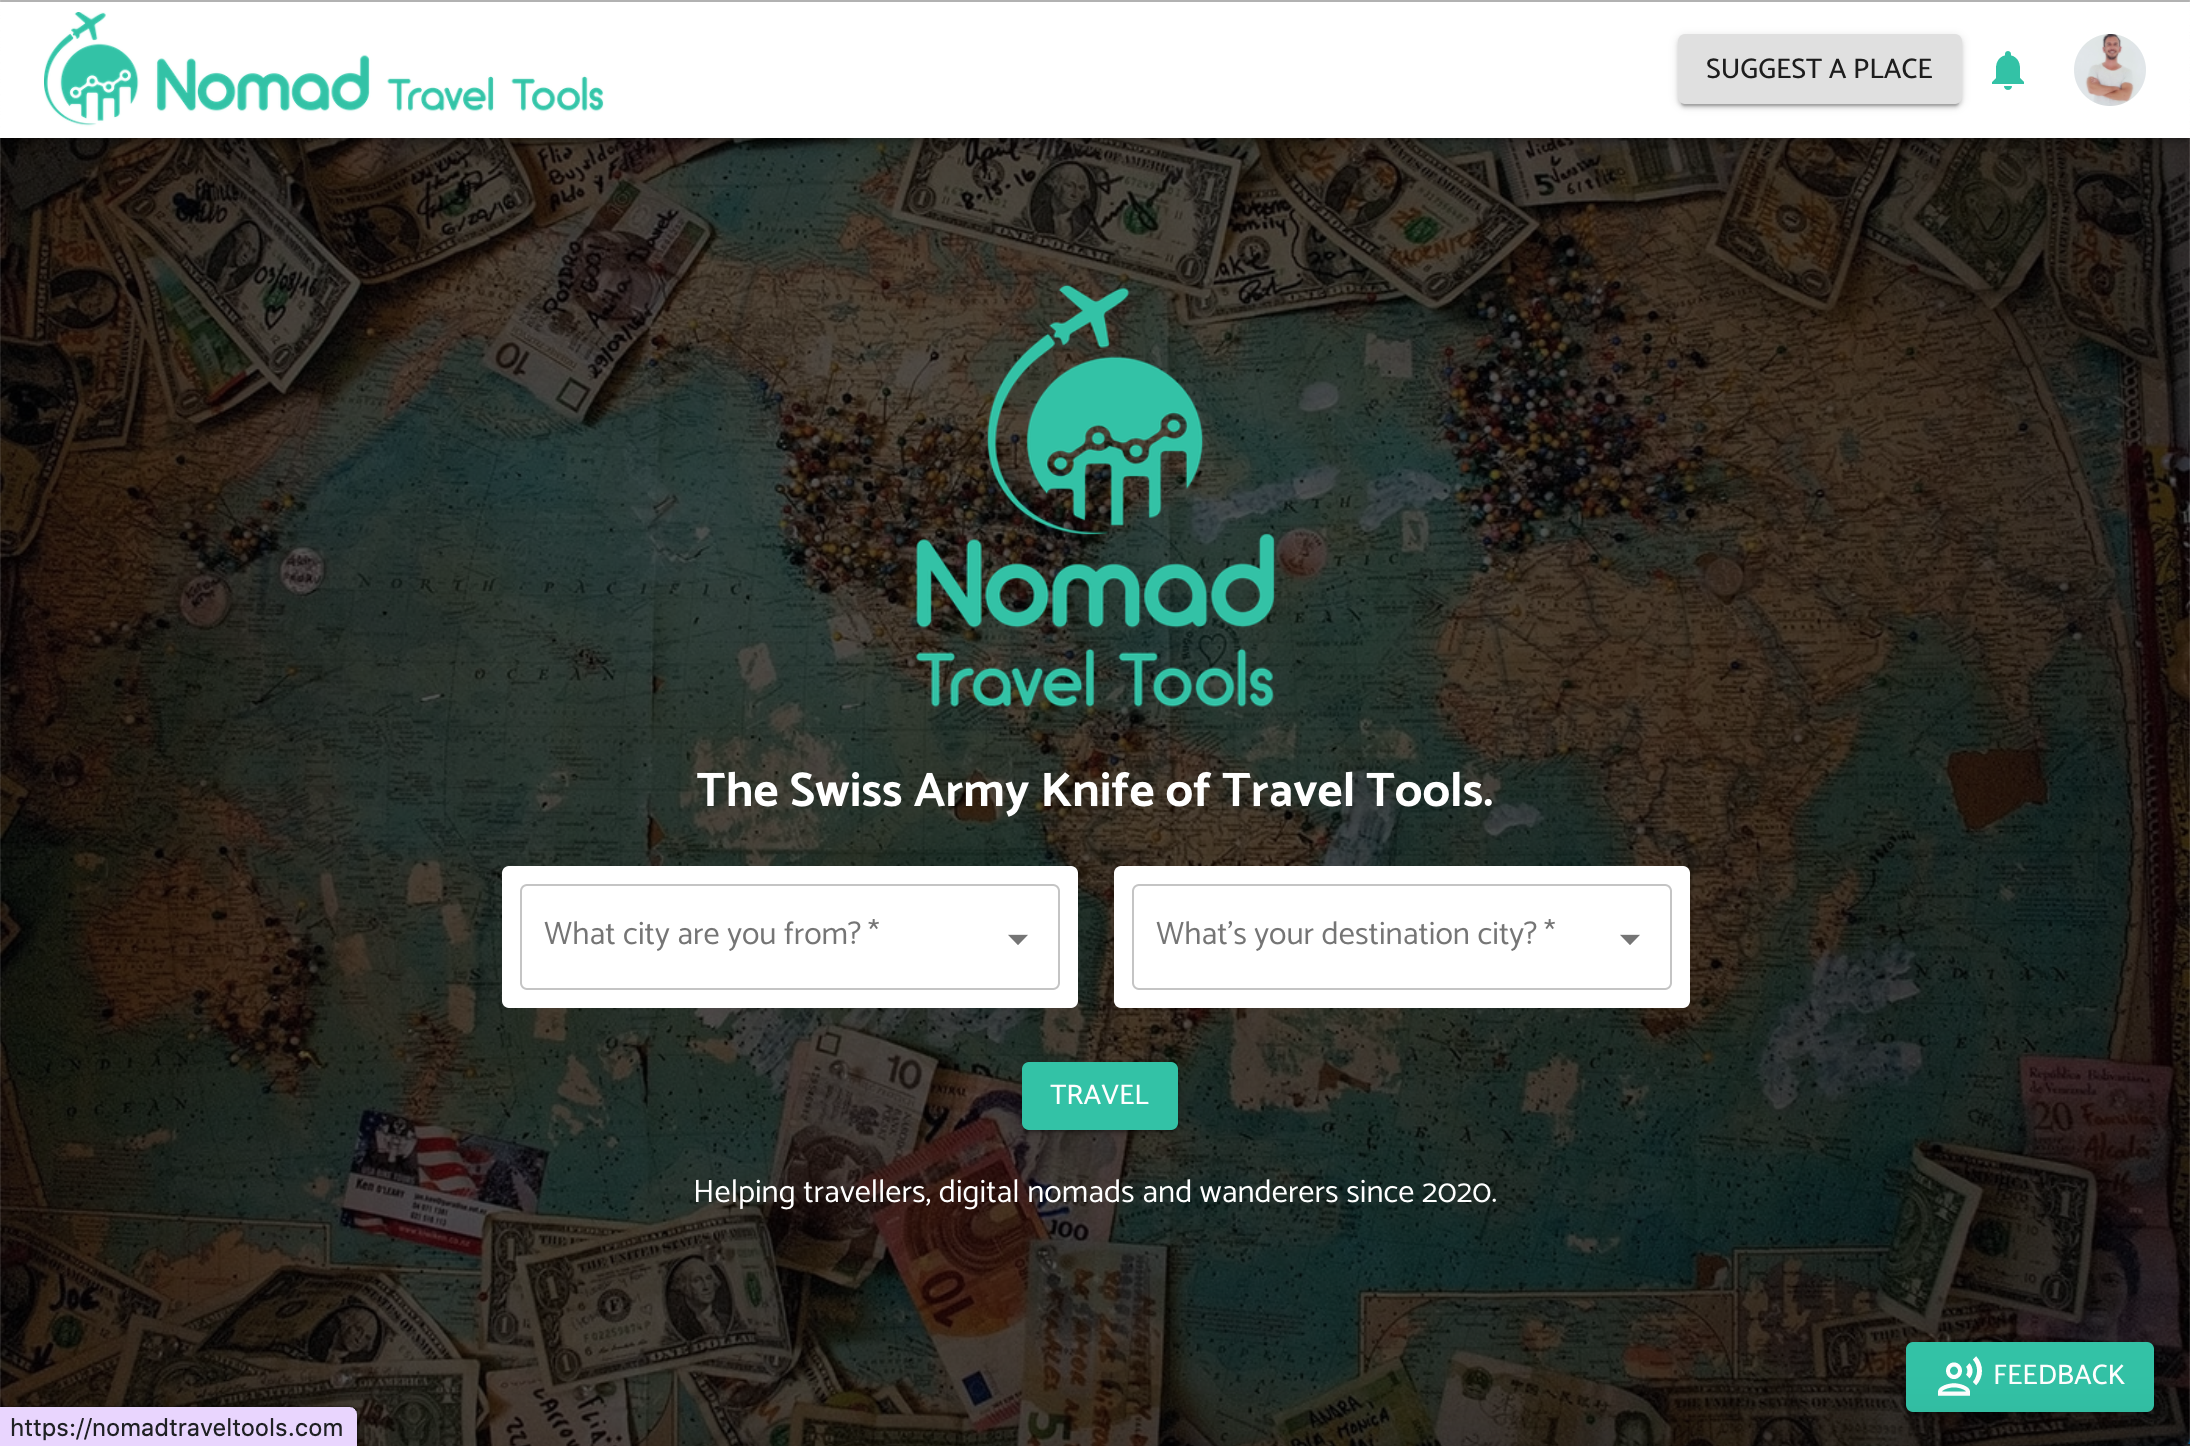 Find detailed information about Nomad Travel Tools